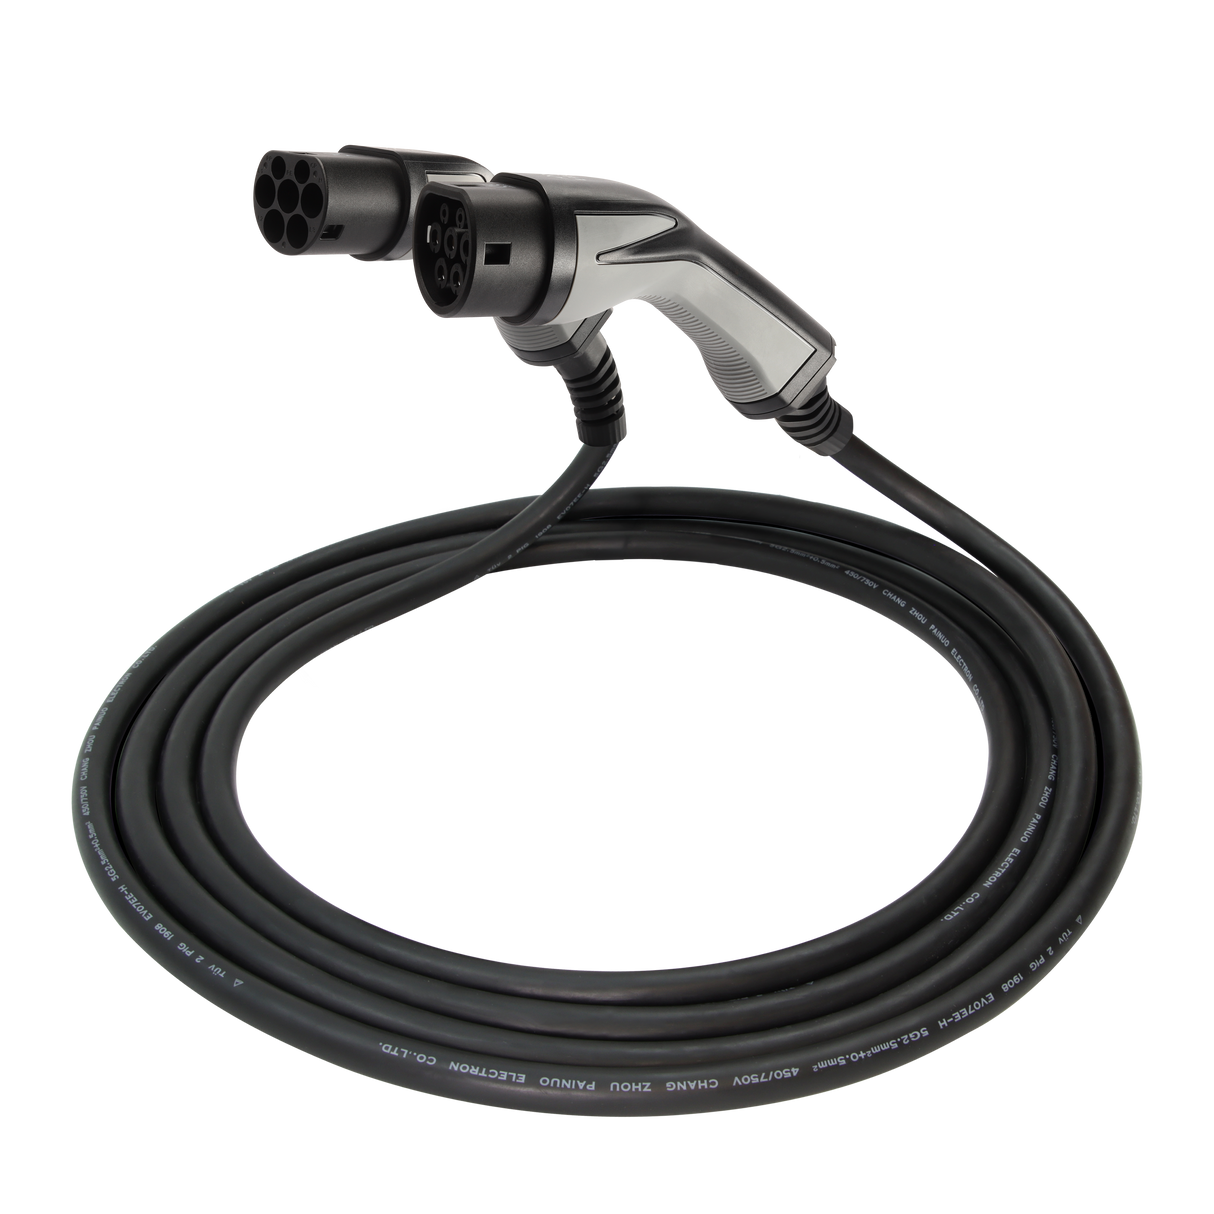 Charging cable Jac iev7s - Erock Pro Type 2 - 32A 1 phase (7.4 kW)